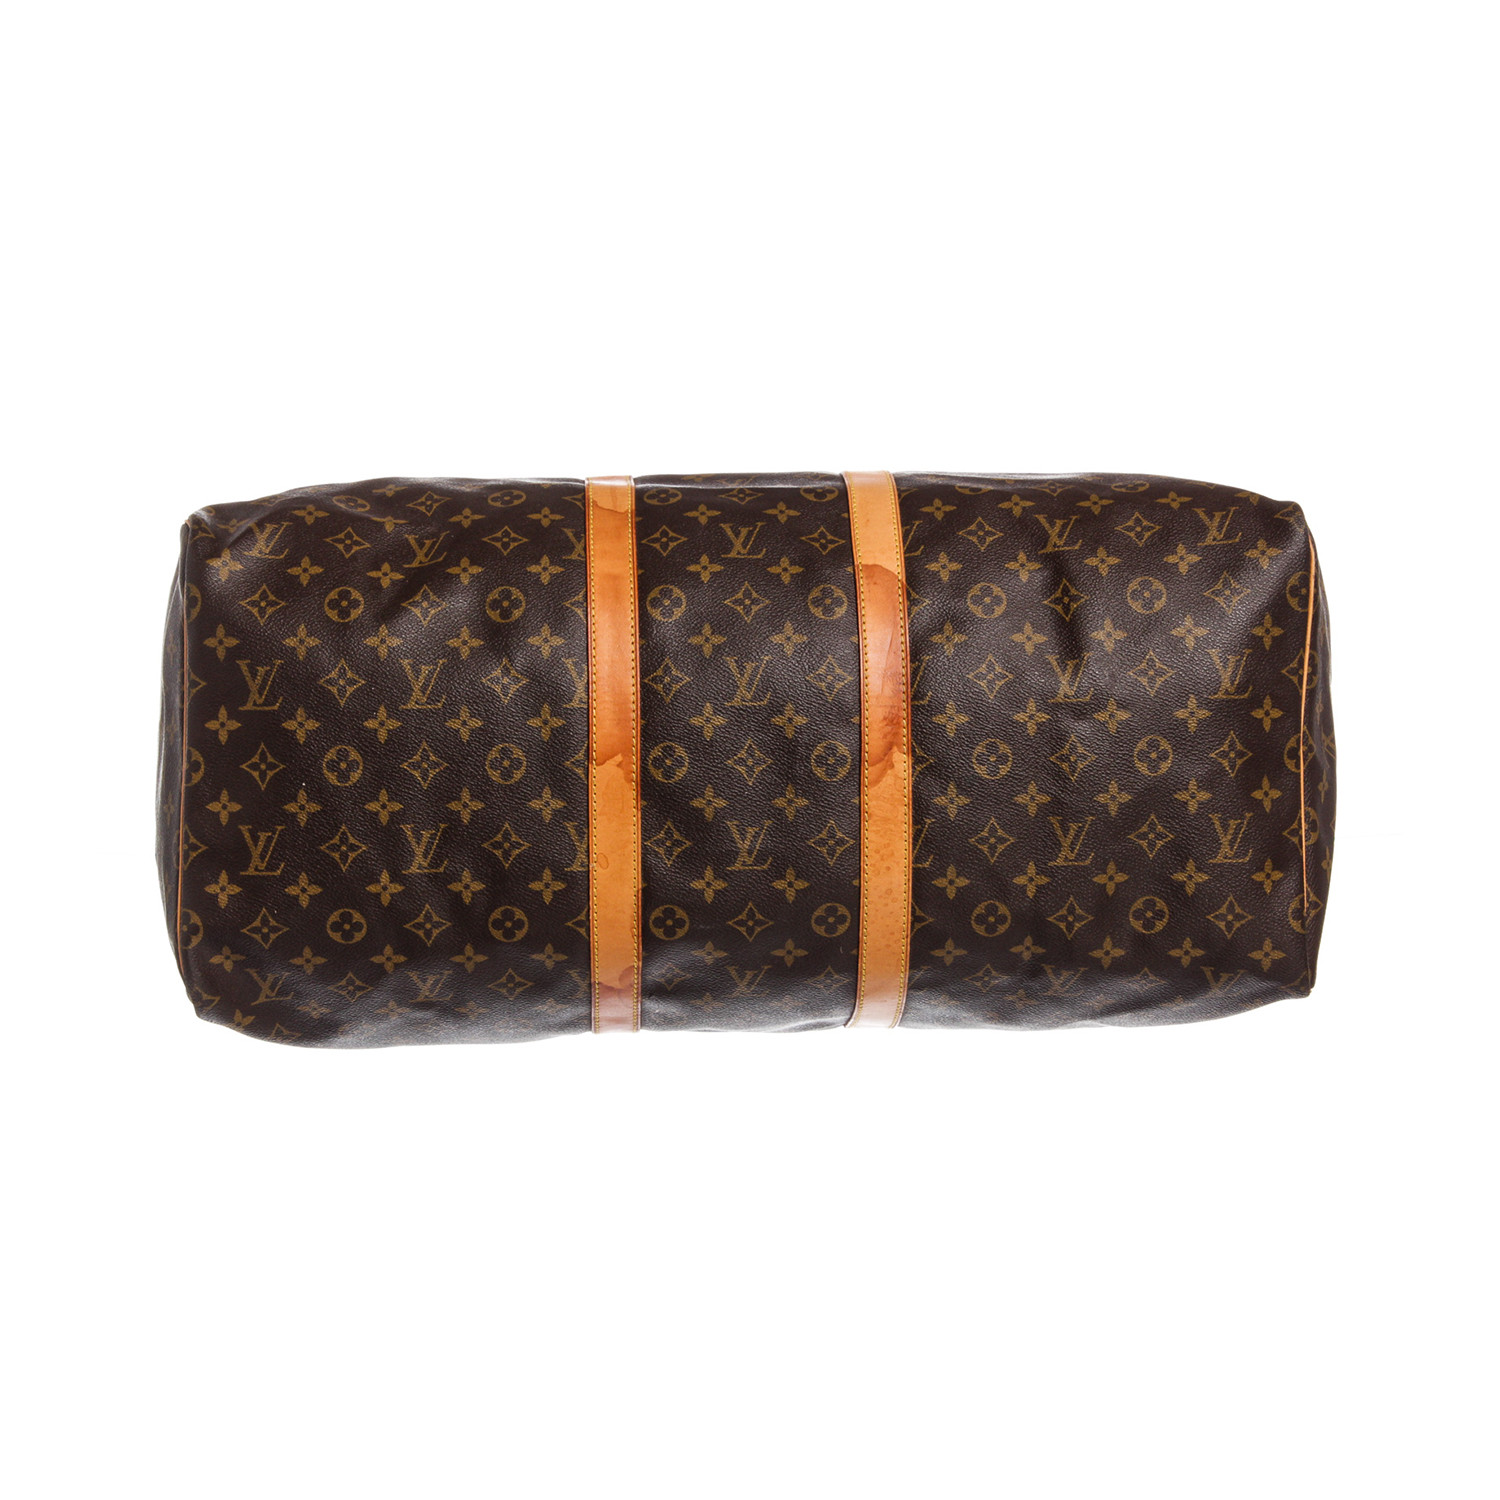 Louis Vuitton // Monogram Canvas Leather Keepall 55 cm Duffle Bag Luggage // FL0062 // Pre-Owned ...